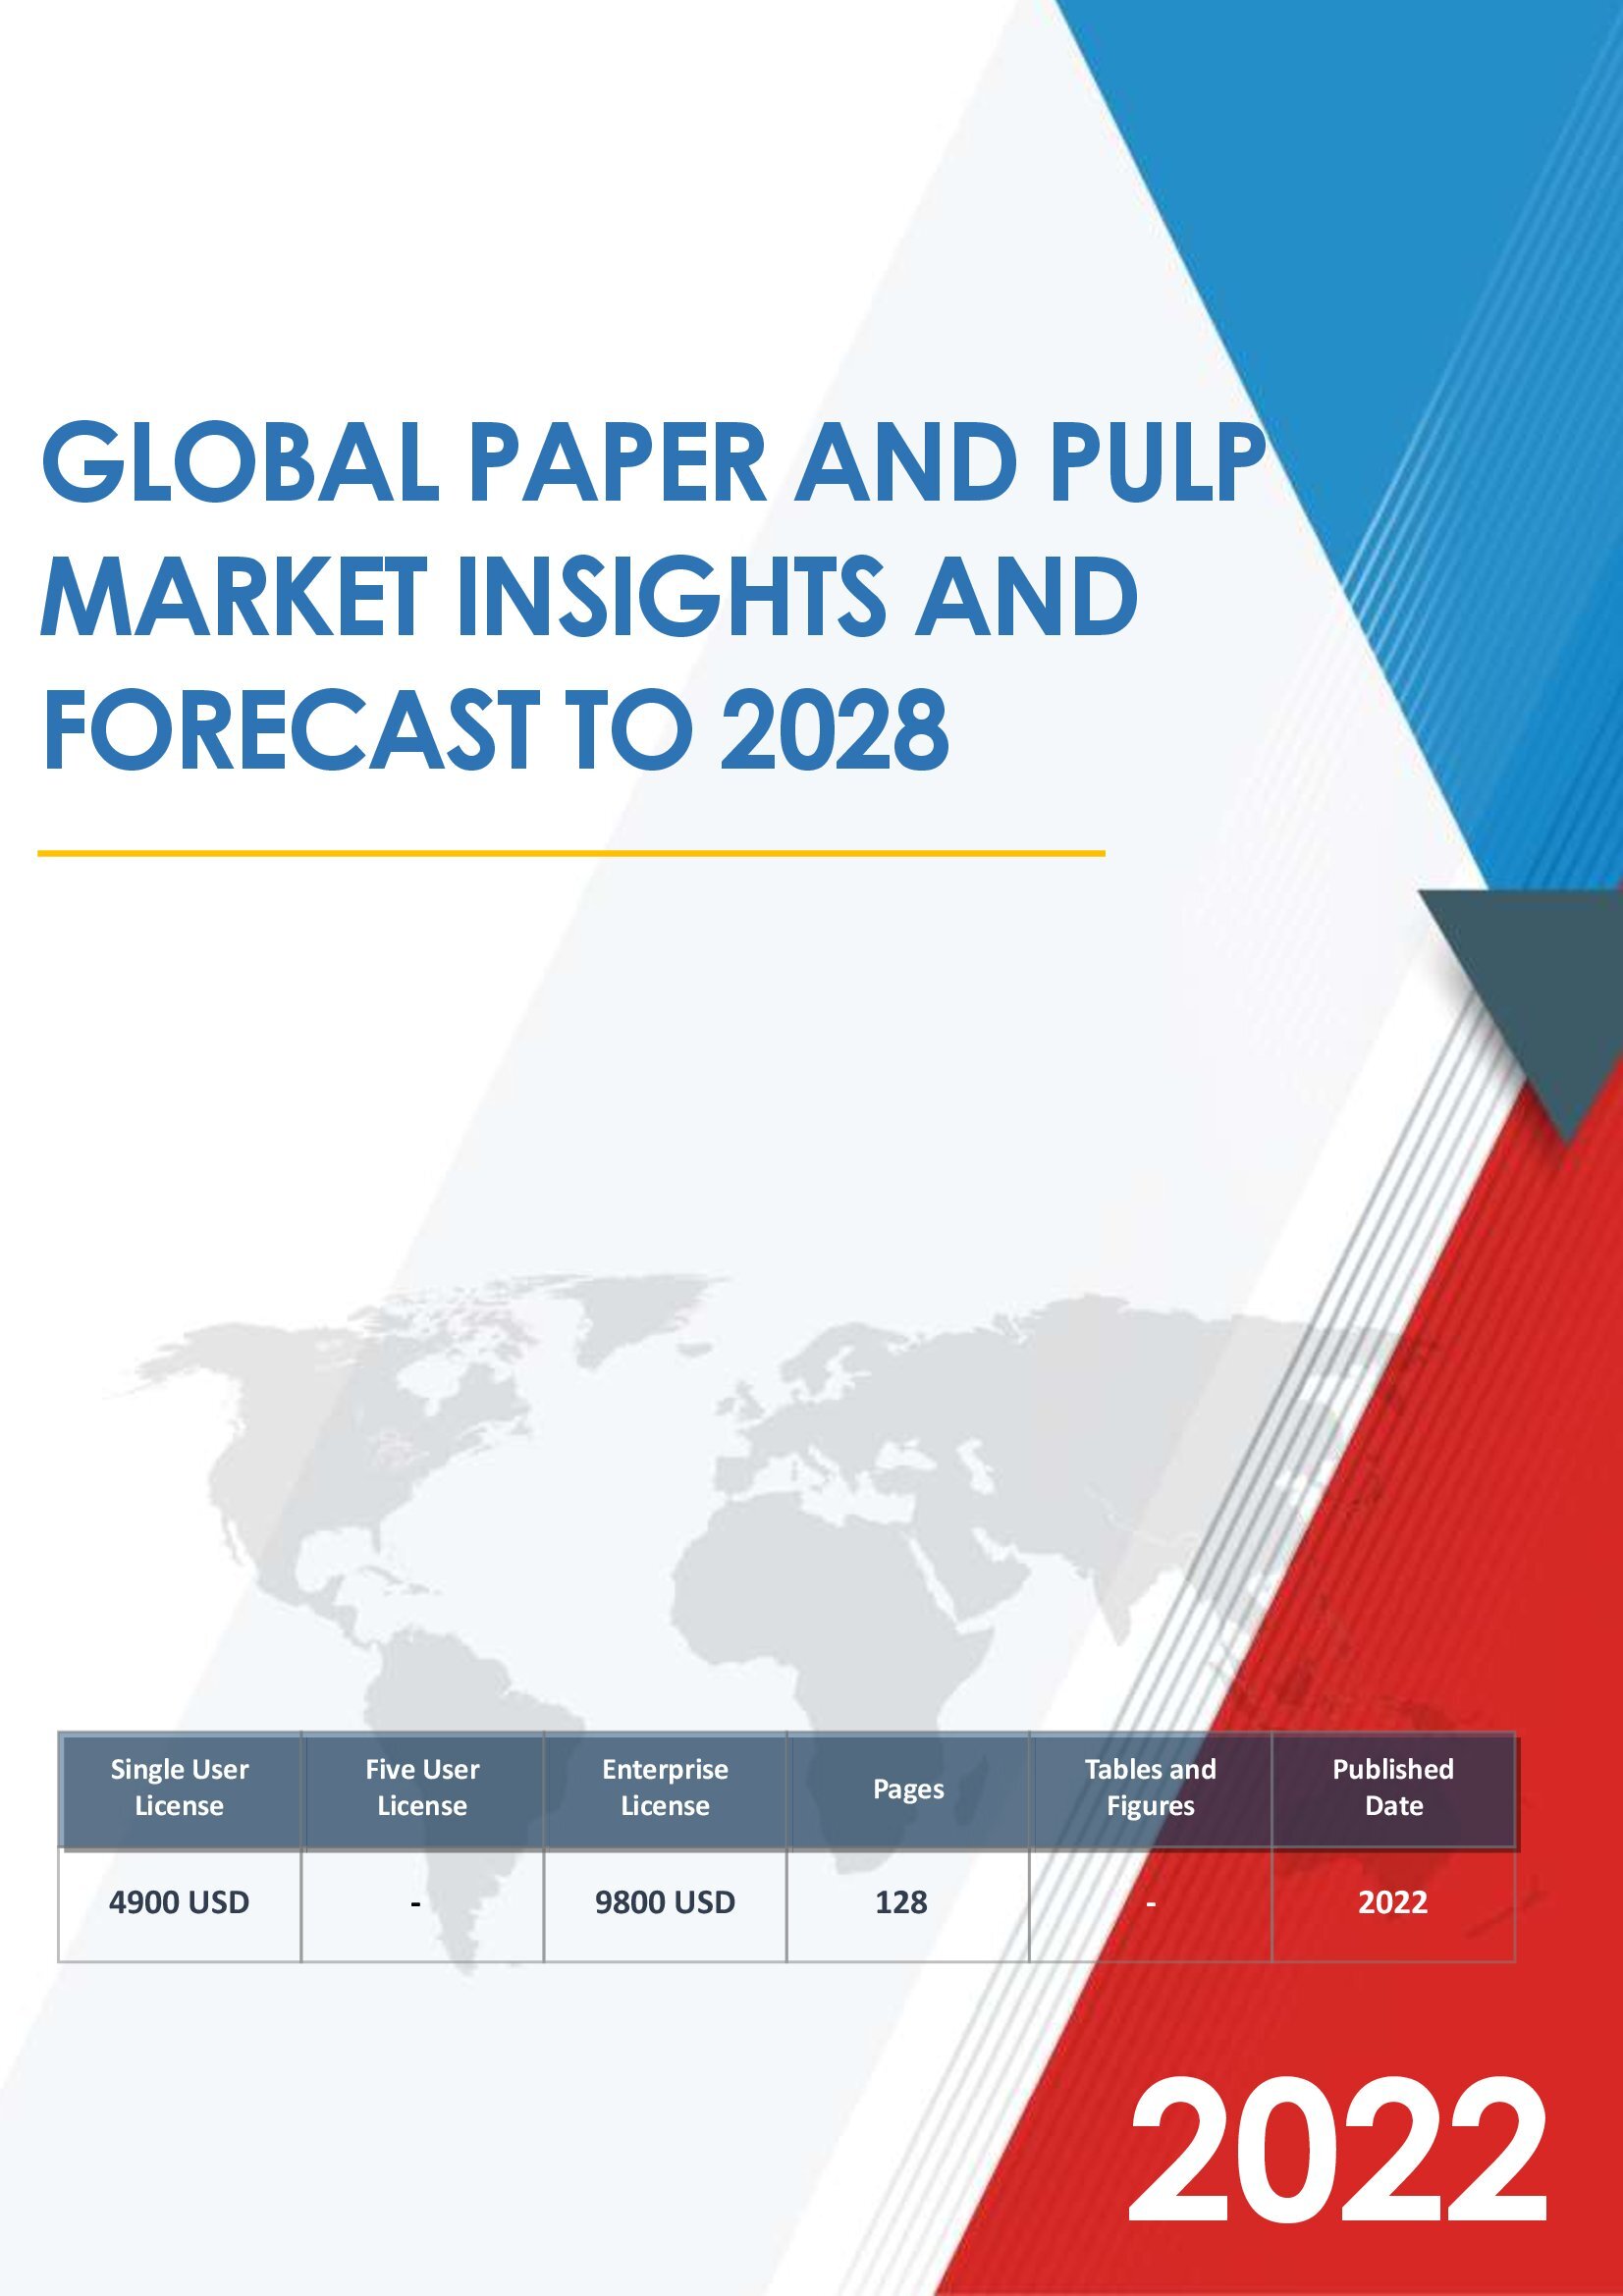 Global Paper and Pulp Market Insights Forecast to 2026